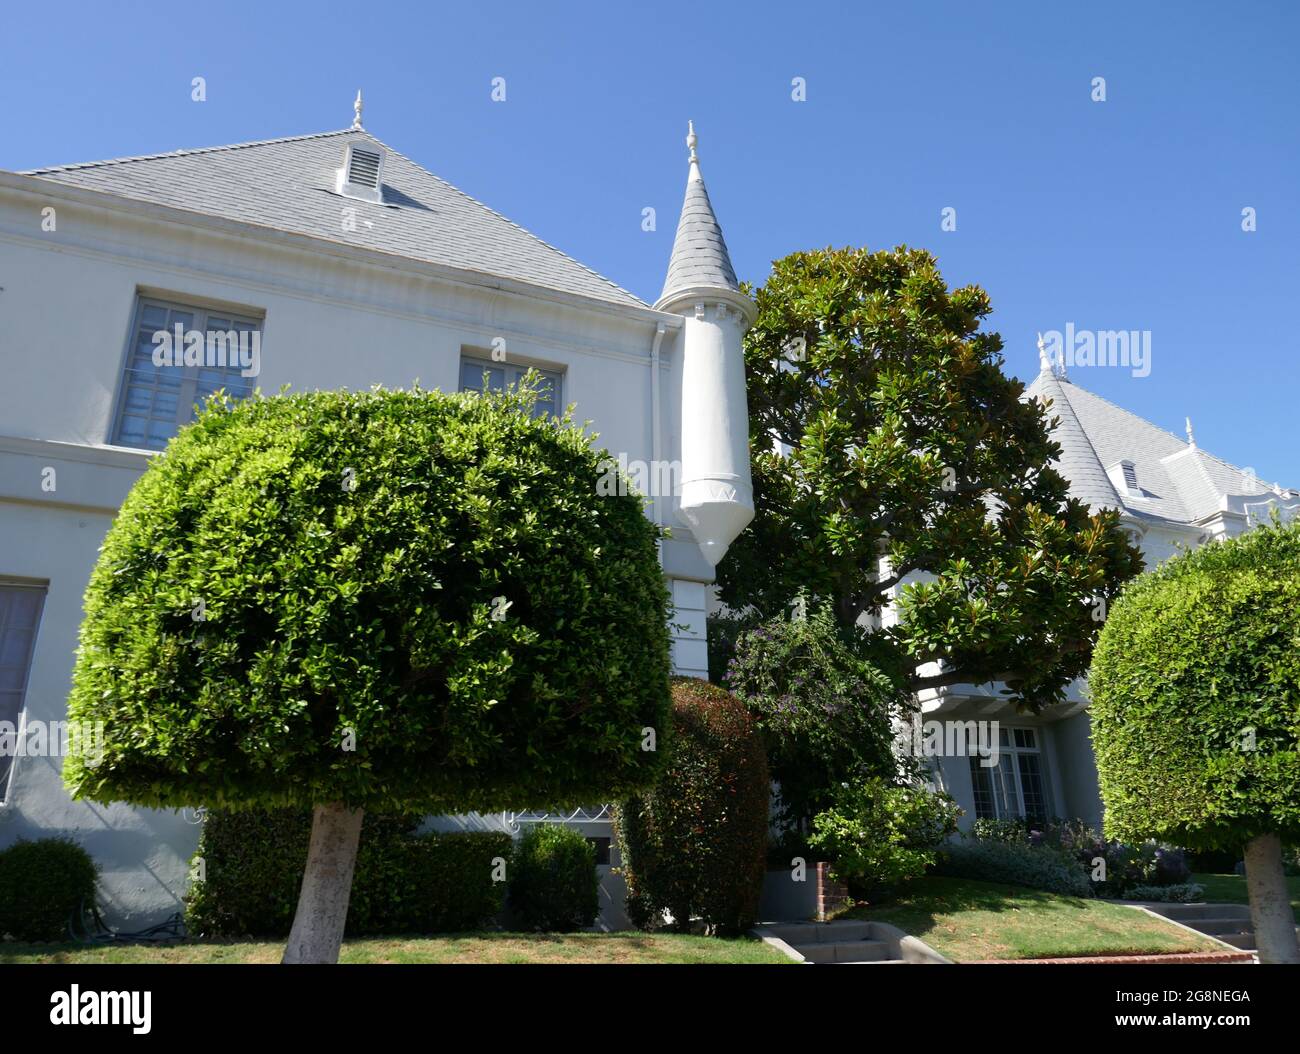 Los Angeles, California, USA 21st July 2021 Singer Madonna and actor Sean Penn's former home/residence and former home of Actresses Marilyn Monroe, Marlene Dietrich and Greta Garbo on July 21, 2021 in Los Angeles, California, USA. Photo by Barry King/Alamy Stock Photo Stock Photo